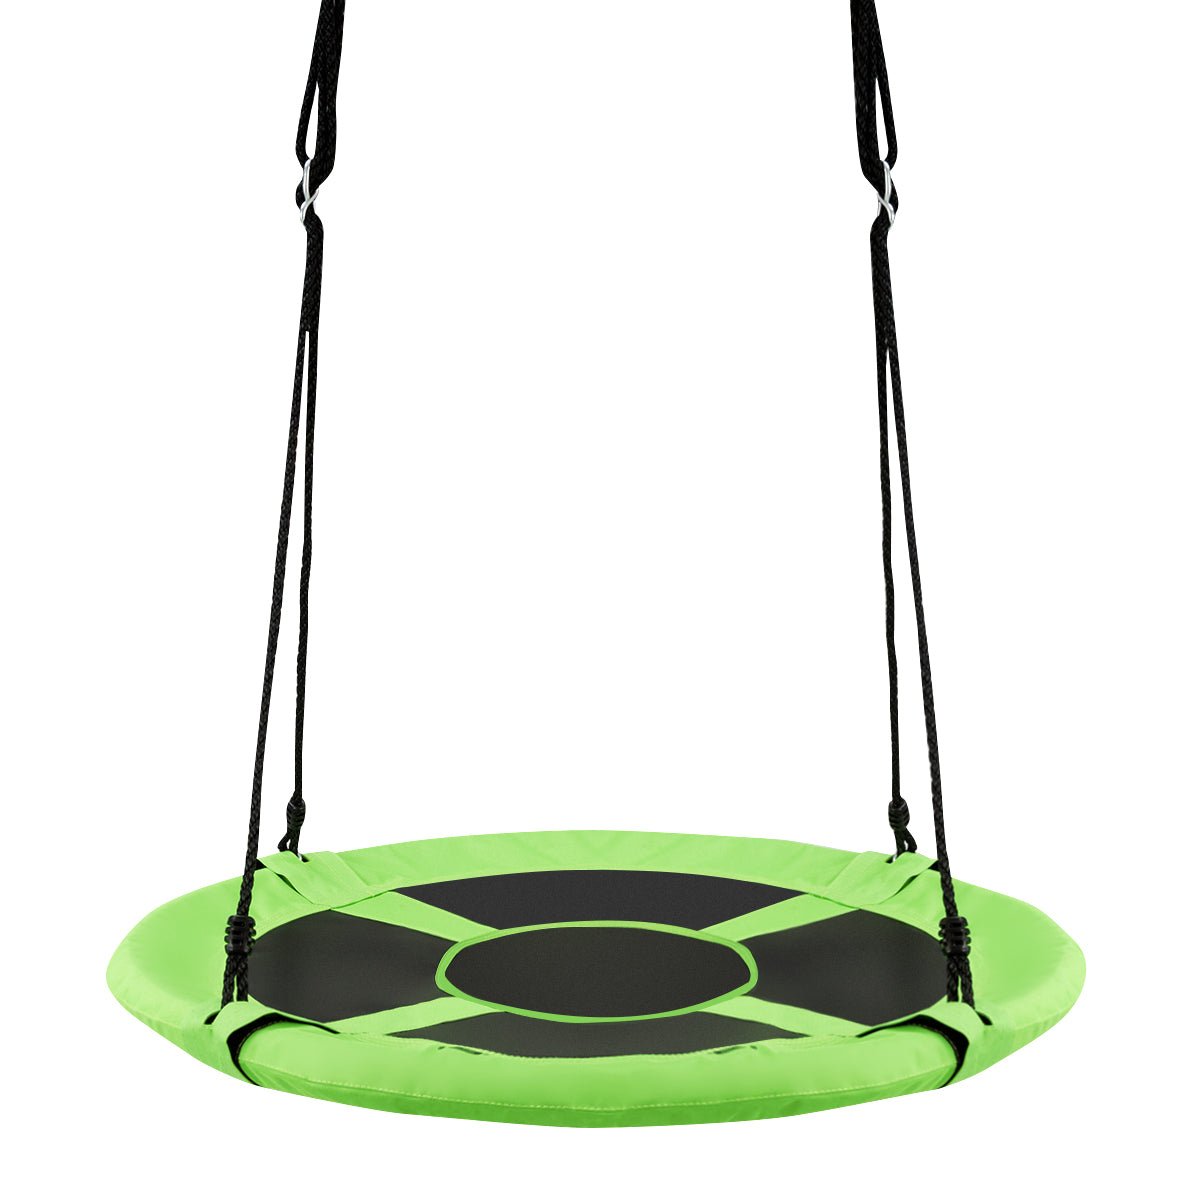 Quality Playtime Fun with Tree Tent Swing Set